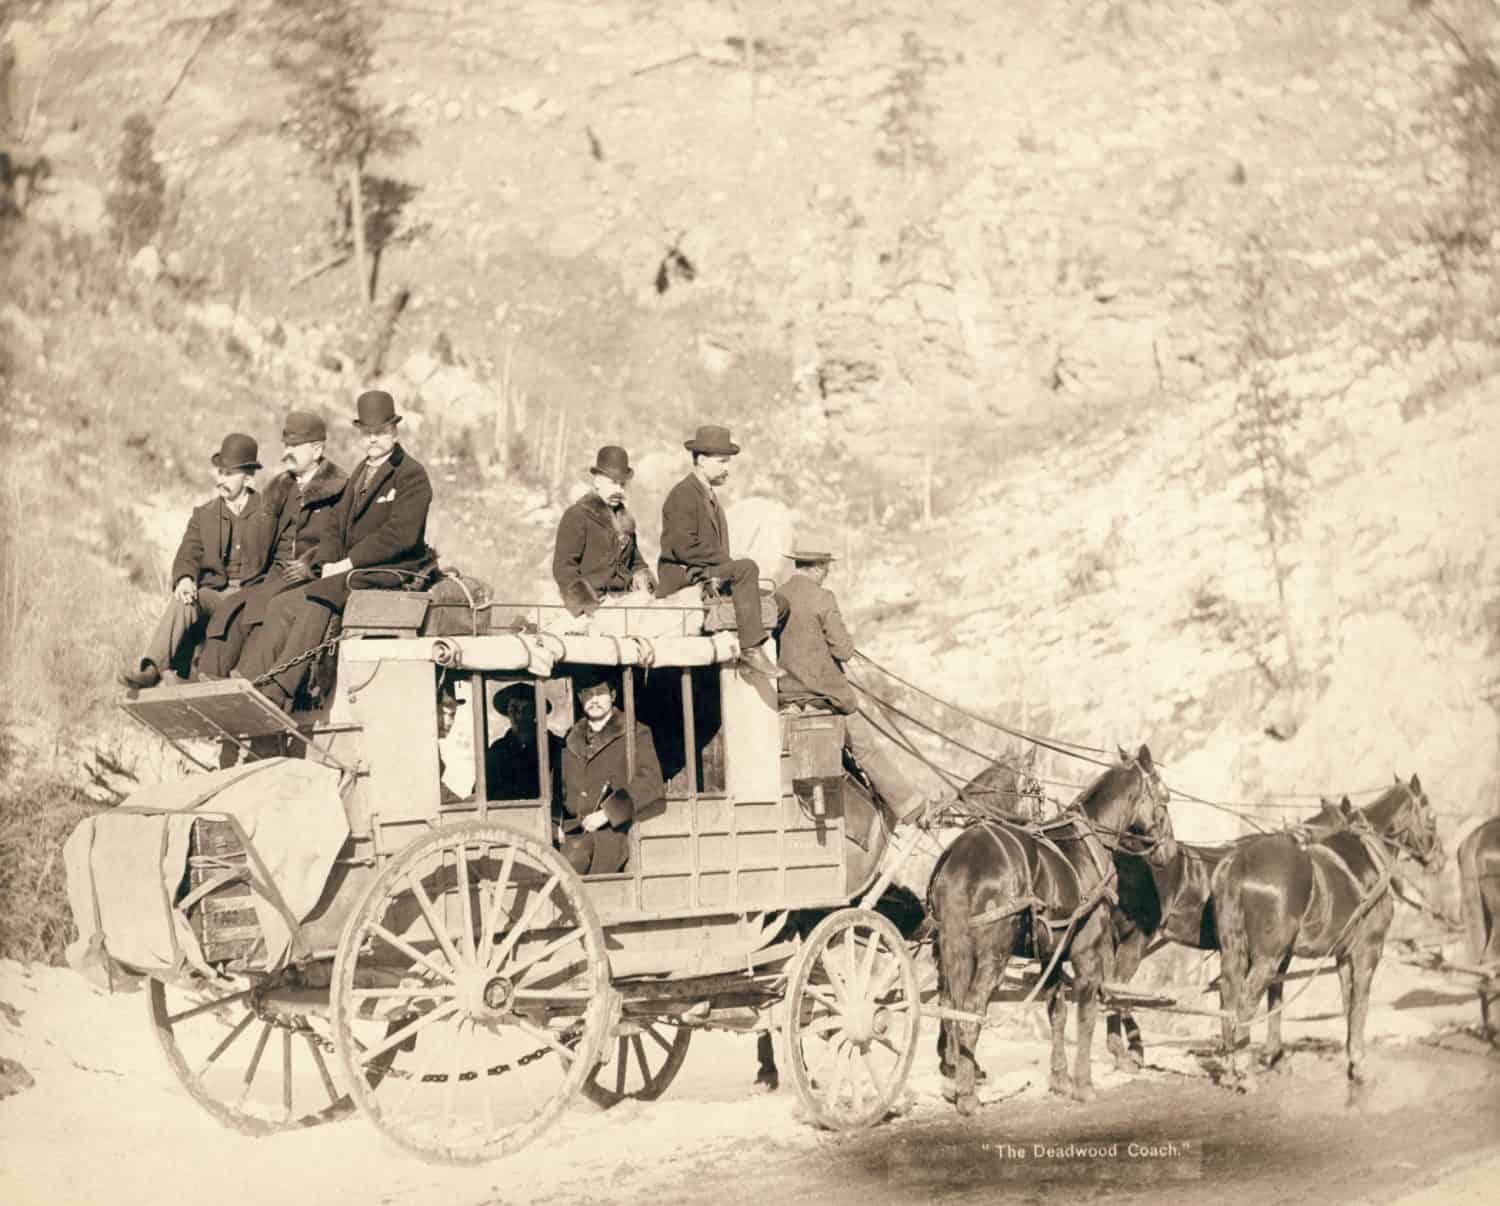 The Deadwood stagecoach fully loaded with nine formally dressed men sitting in and on top of coach, ca.1885.